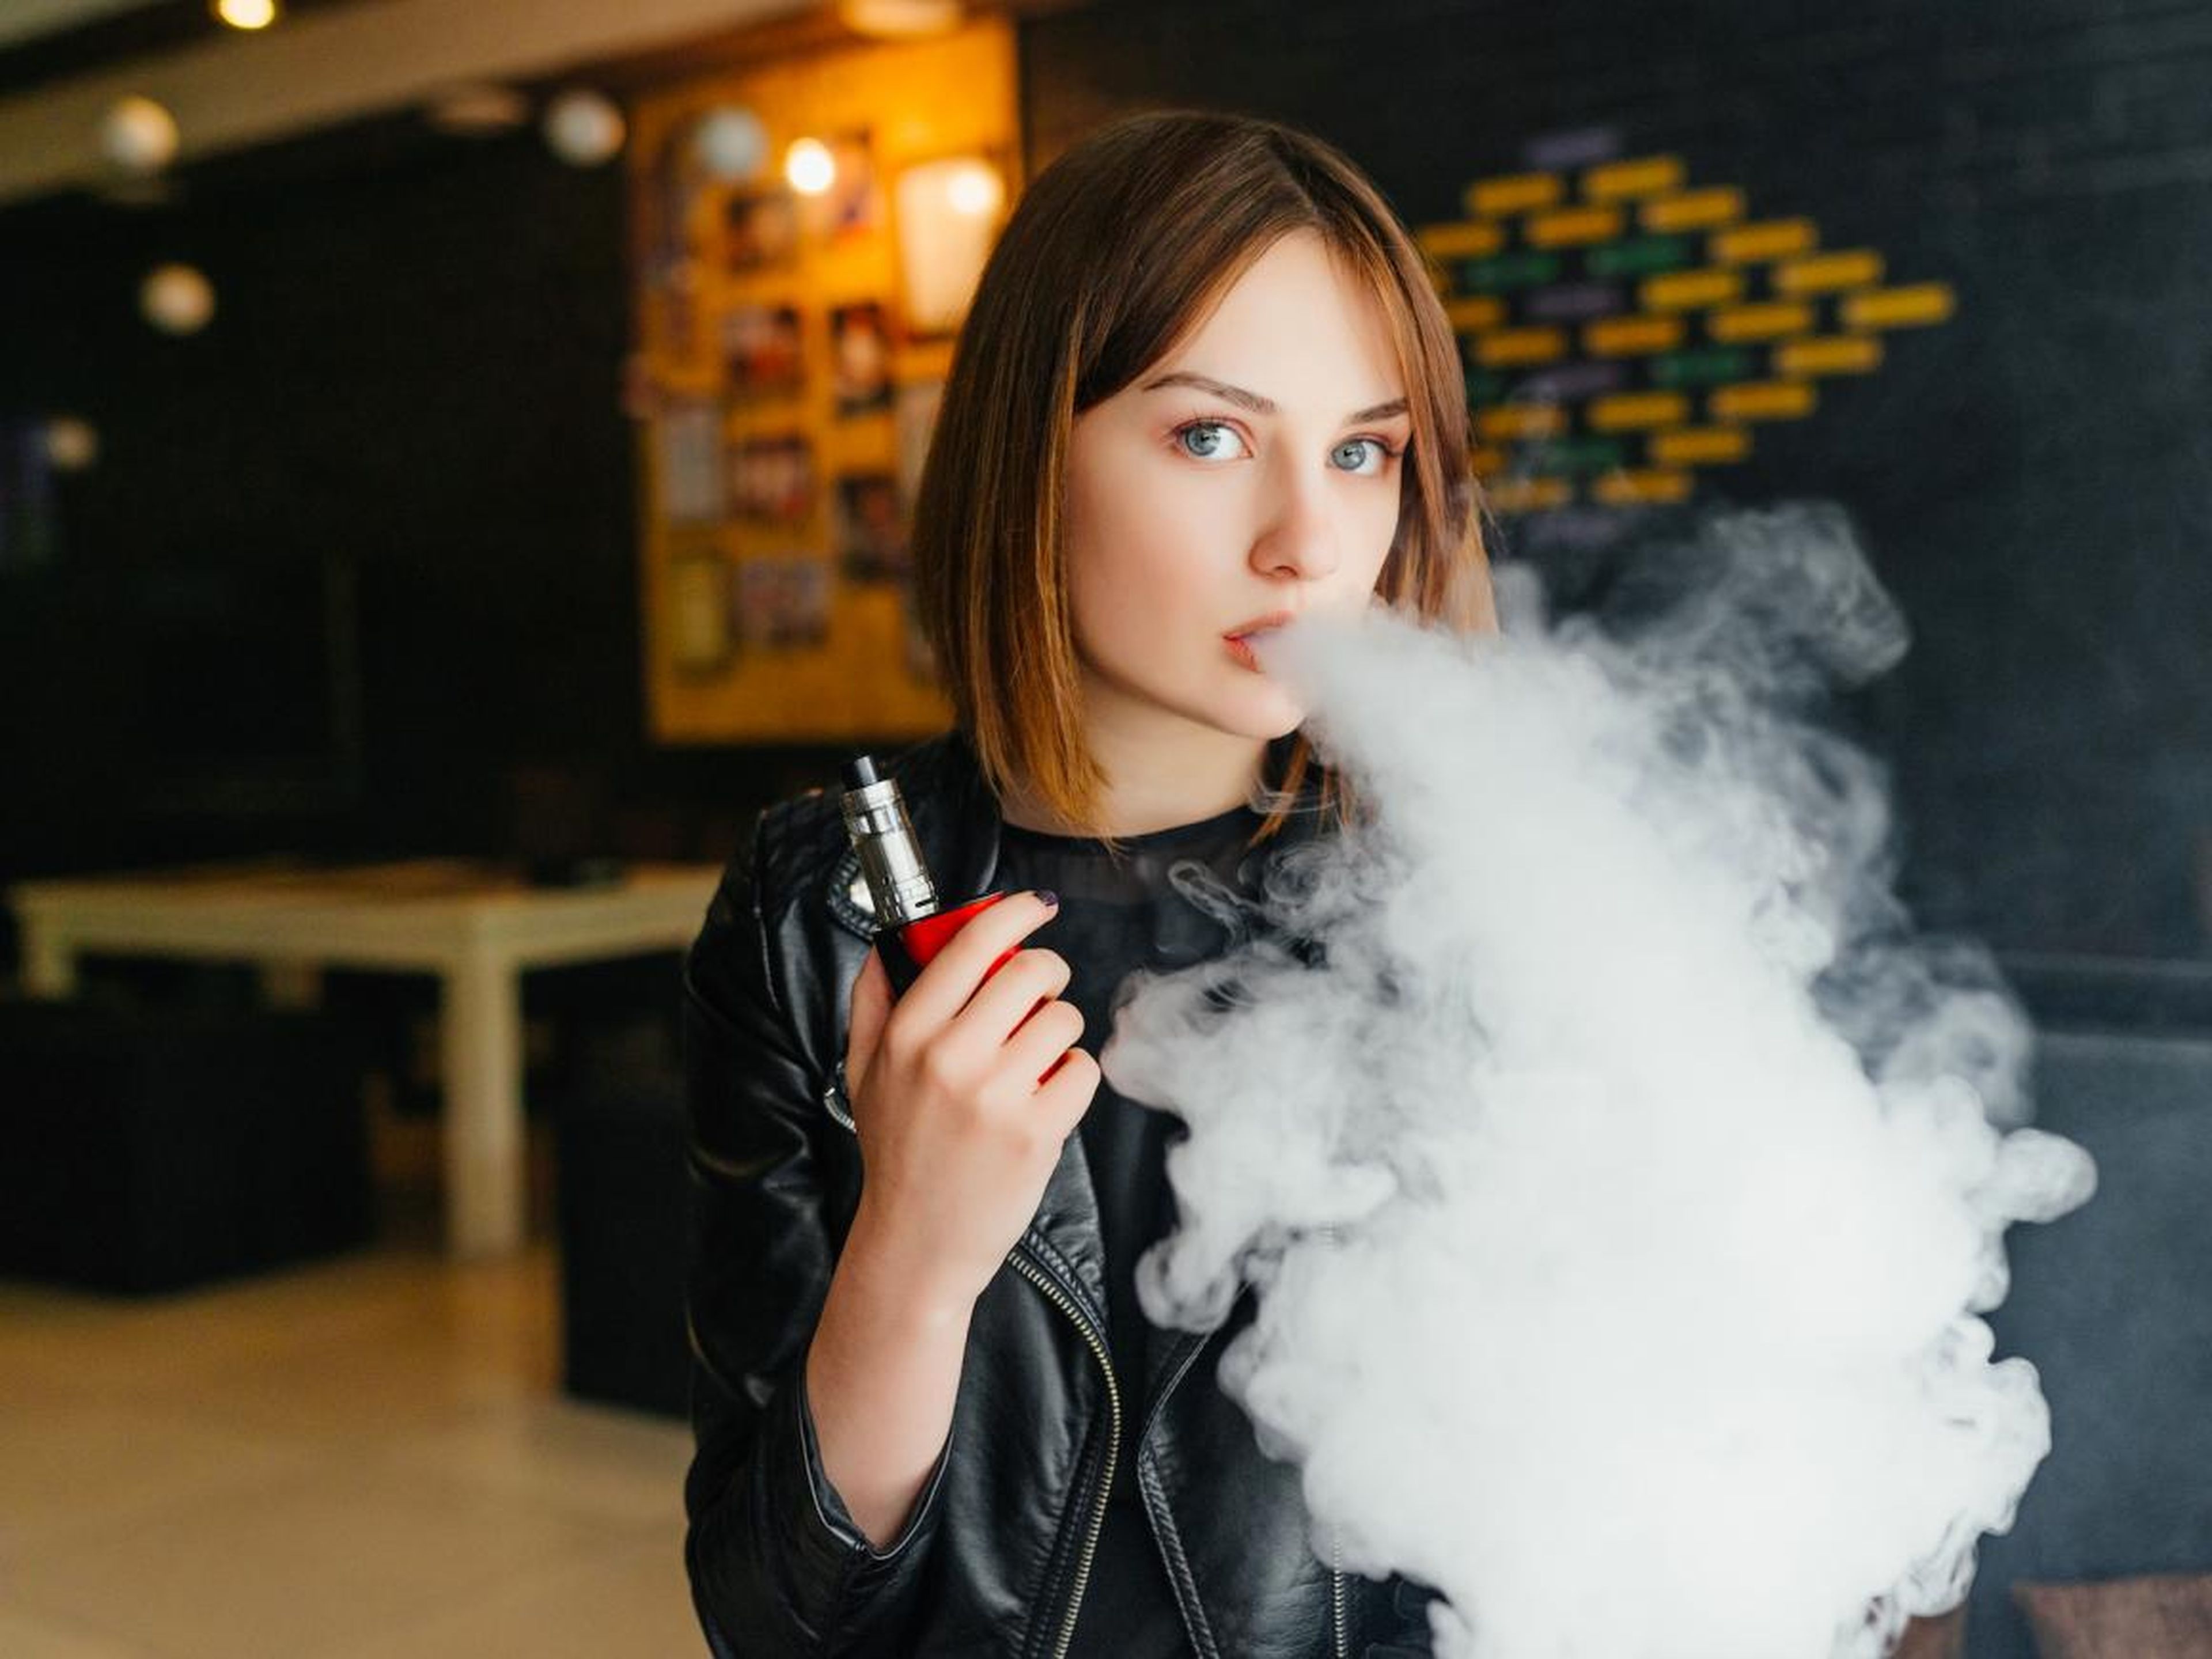 Vaping among teens skyrocketed in the last year as cigarette use declined, new CDC study shows